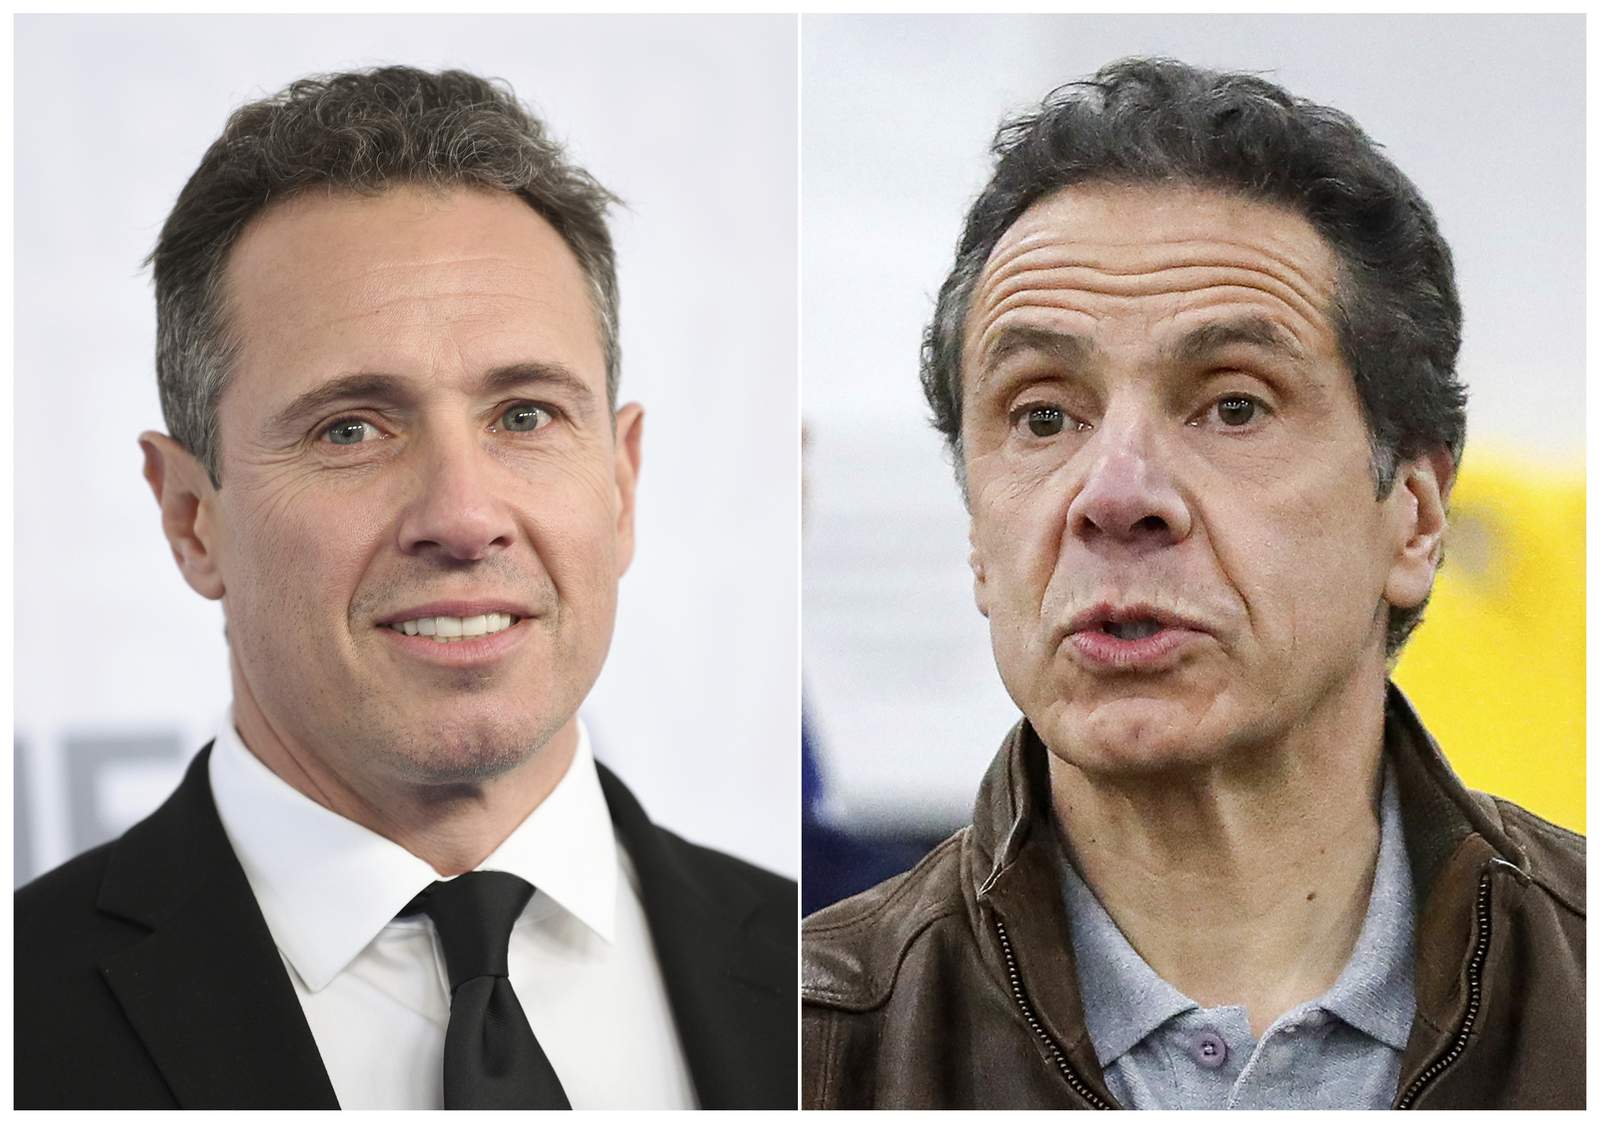 CNN's Chris Cuomo says he 'obviously' can't cover brother